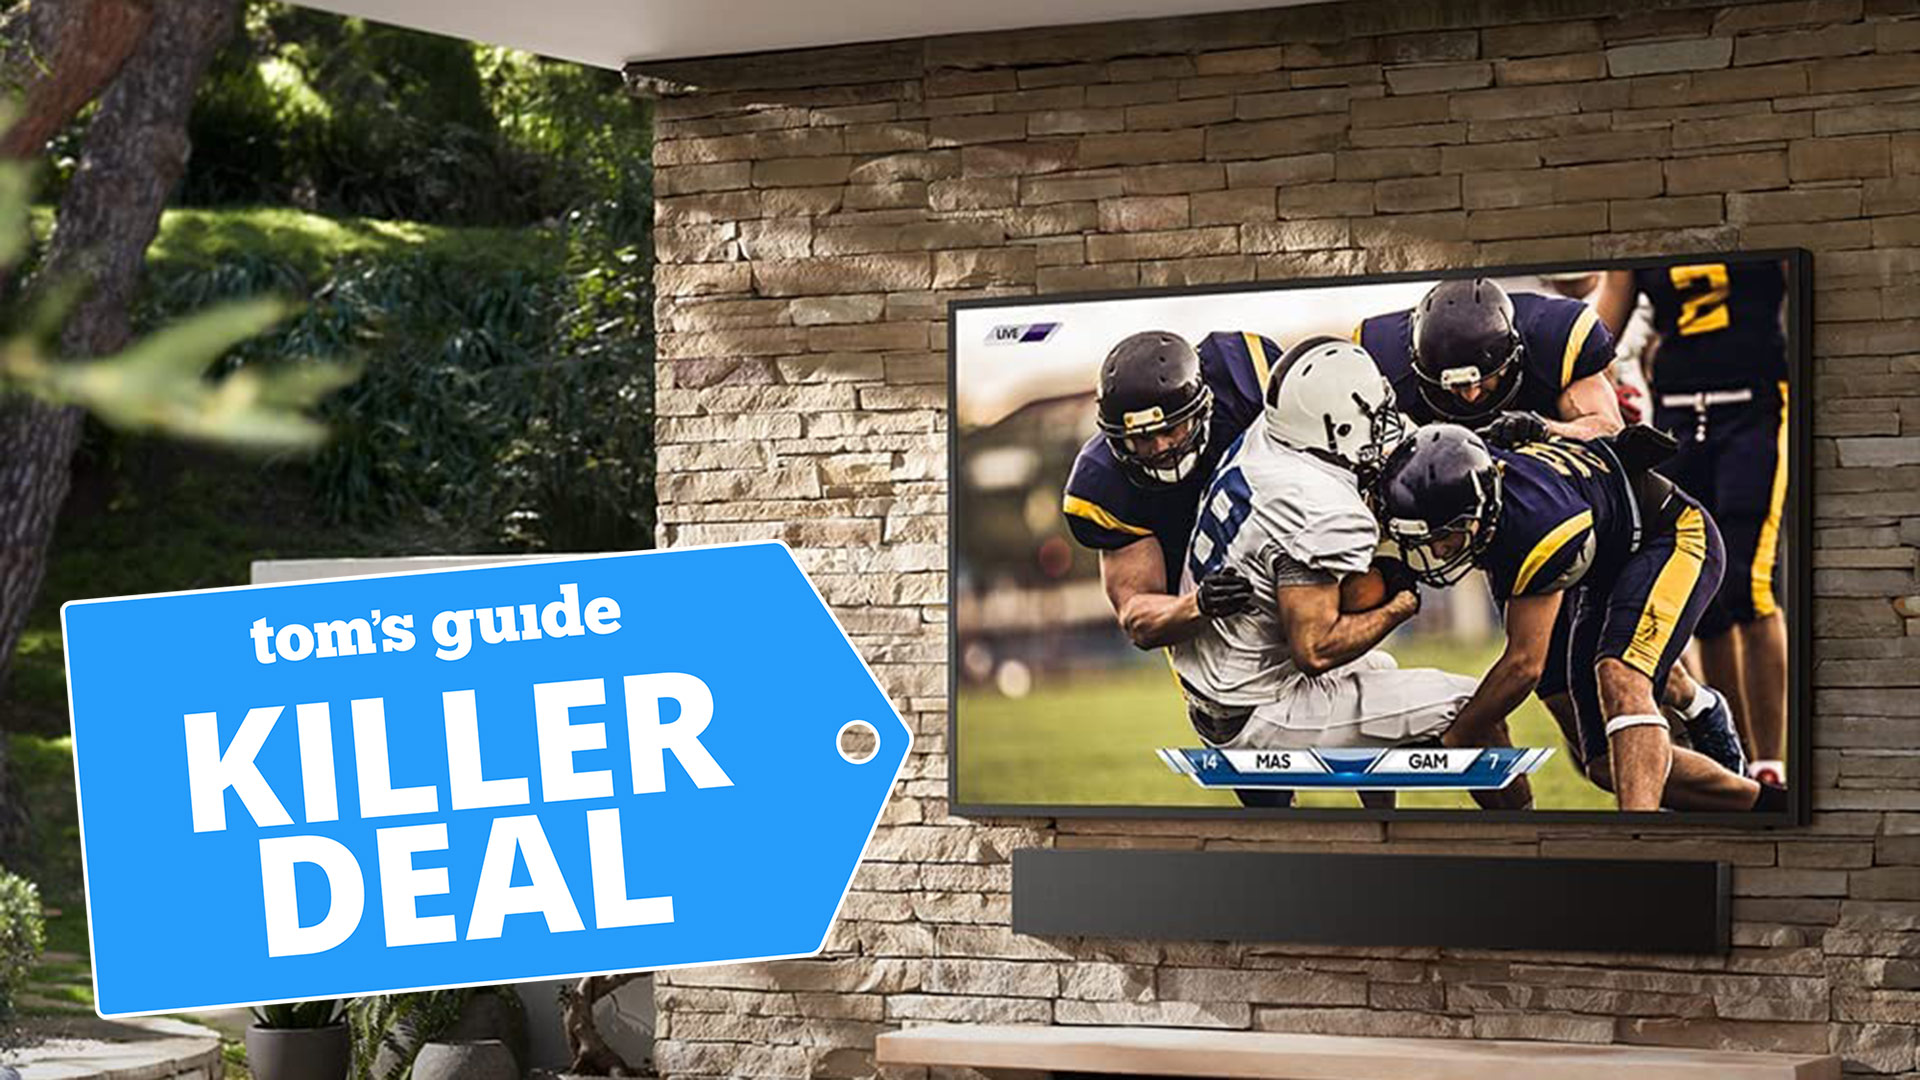 Samsung The Terrace 55 inch wall mounted outdoor TV